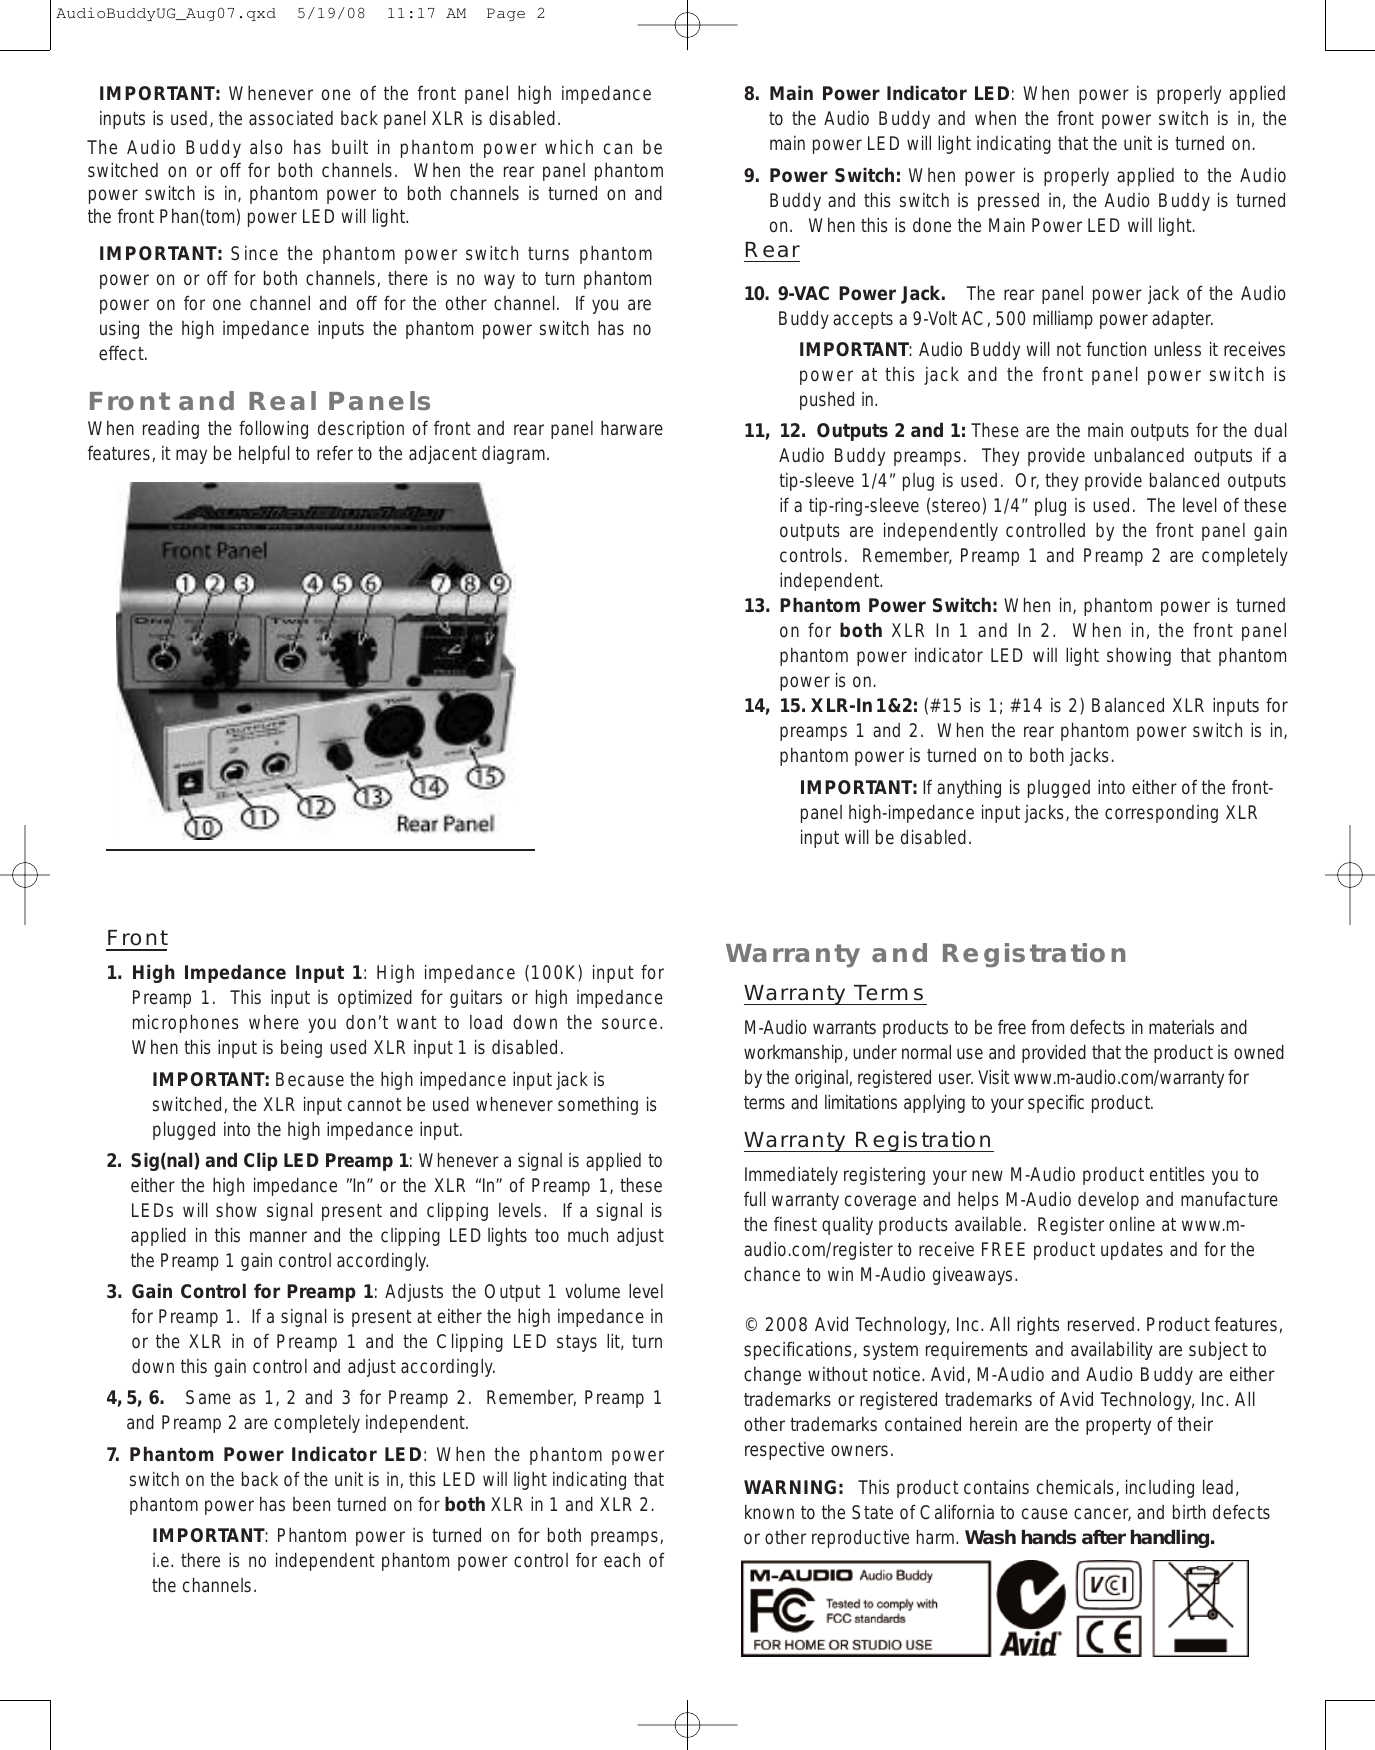 Page 4 of 8 - M-Audio M-Audio-Audio-Buddy-Dual-Mic-Preamp-Users-Manual- Audio Buddy User Guide  M-audio-audio-buddy-dual-mic-preamp-users-manual